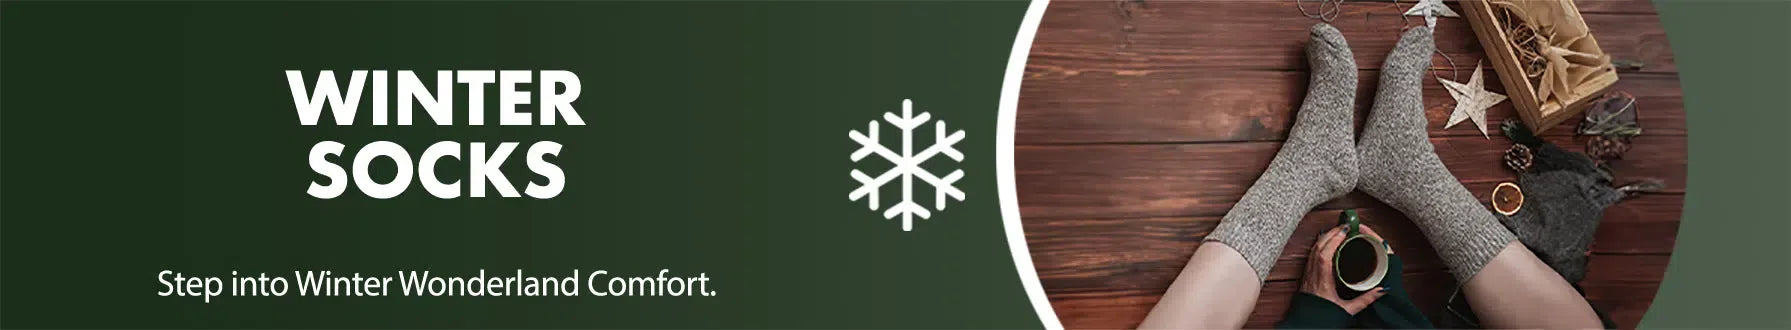 GoWith winter socks collection banner desktop